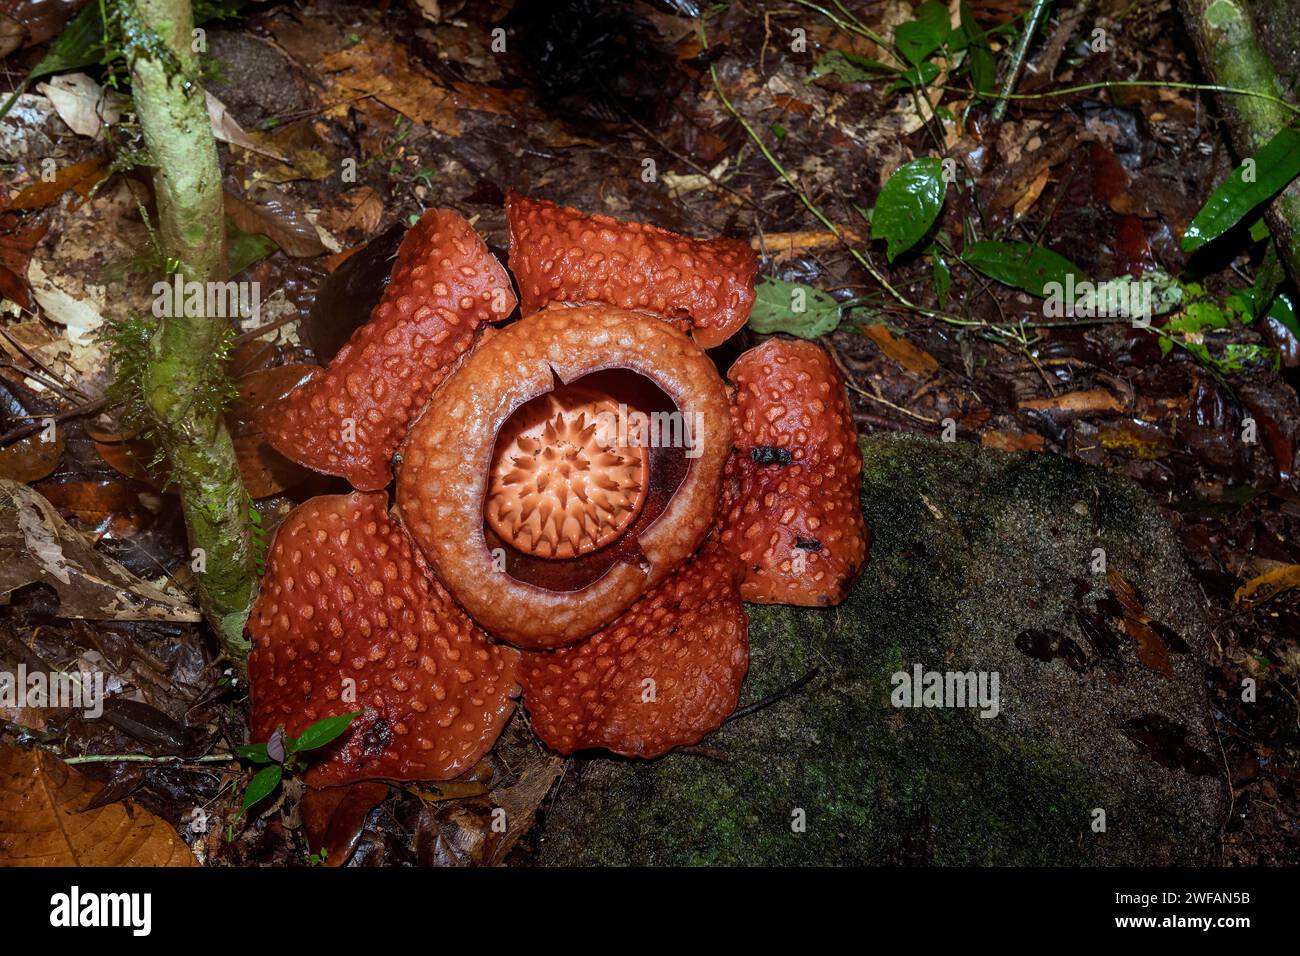 Giant flower of the parasitic Rafflesia tuan-mudae in Gundung Gading National Park, Sarawak, Borneo. The flower is about 50 cm in diameter on its Stock Photo